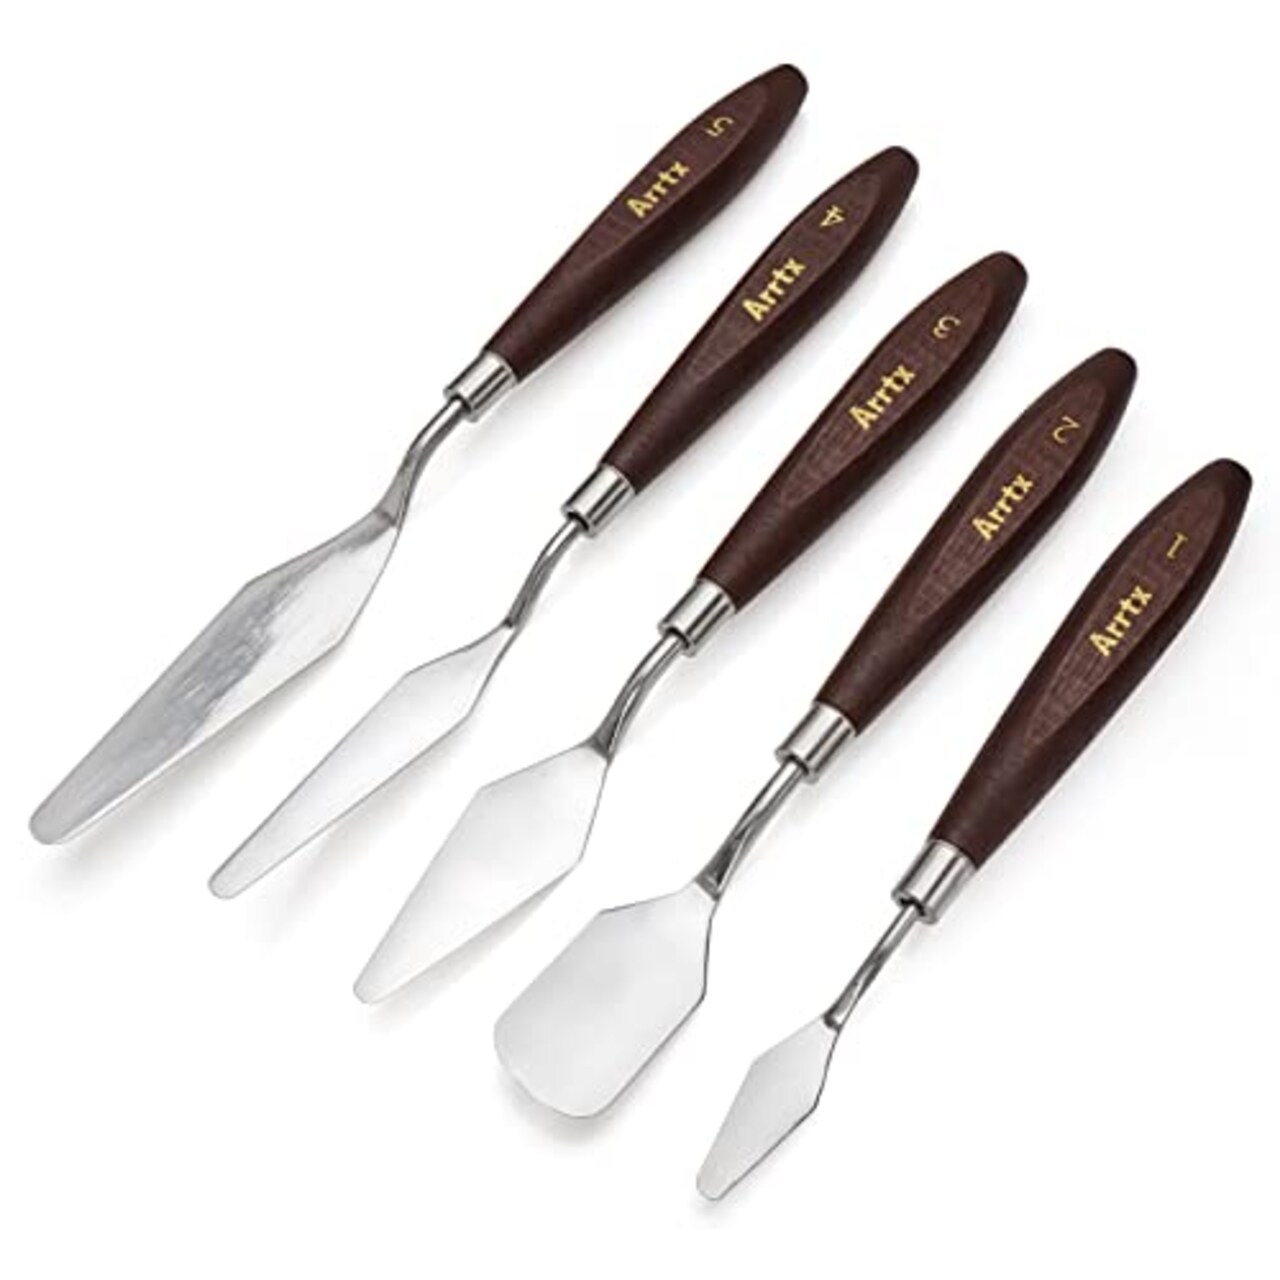 5 Pieces Painting Knives Stainless Steel Spatula Palette Knife Oil Painting  Accessories Color Mixing Set for Oil, Canvas, Acrylic Painting-Lightwish